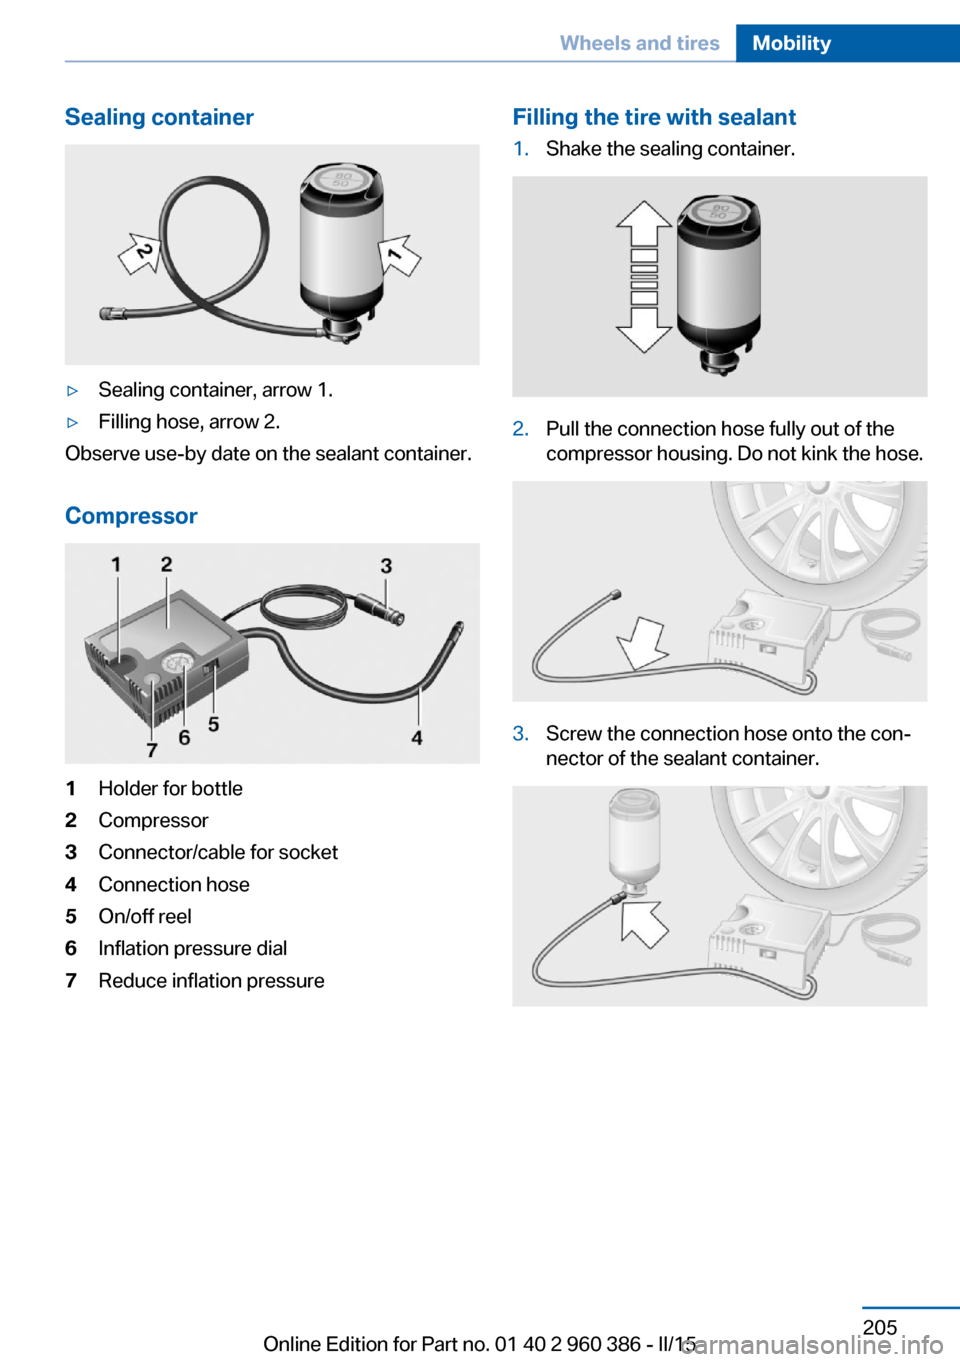 BMW X3 2015 F25 Owners Guide Sealing container▷Sealing container, arrow 1.▷Filling hose, arrow 2.
Observe use-by date on the sealant container.
Compressor
1Holder for bottle2Compressor3Connector/cable for socket4Connection ho